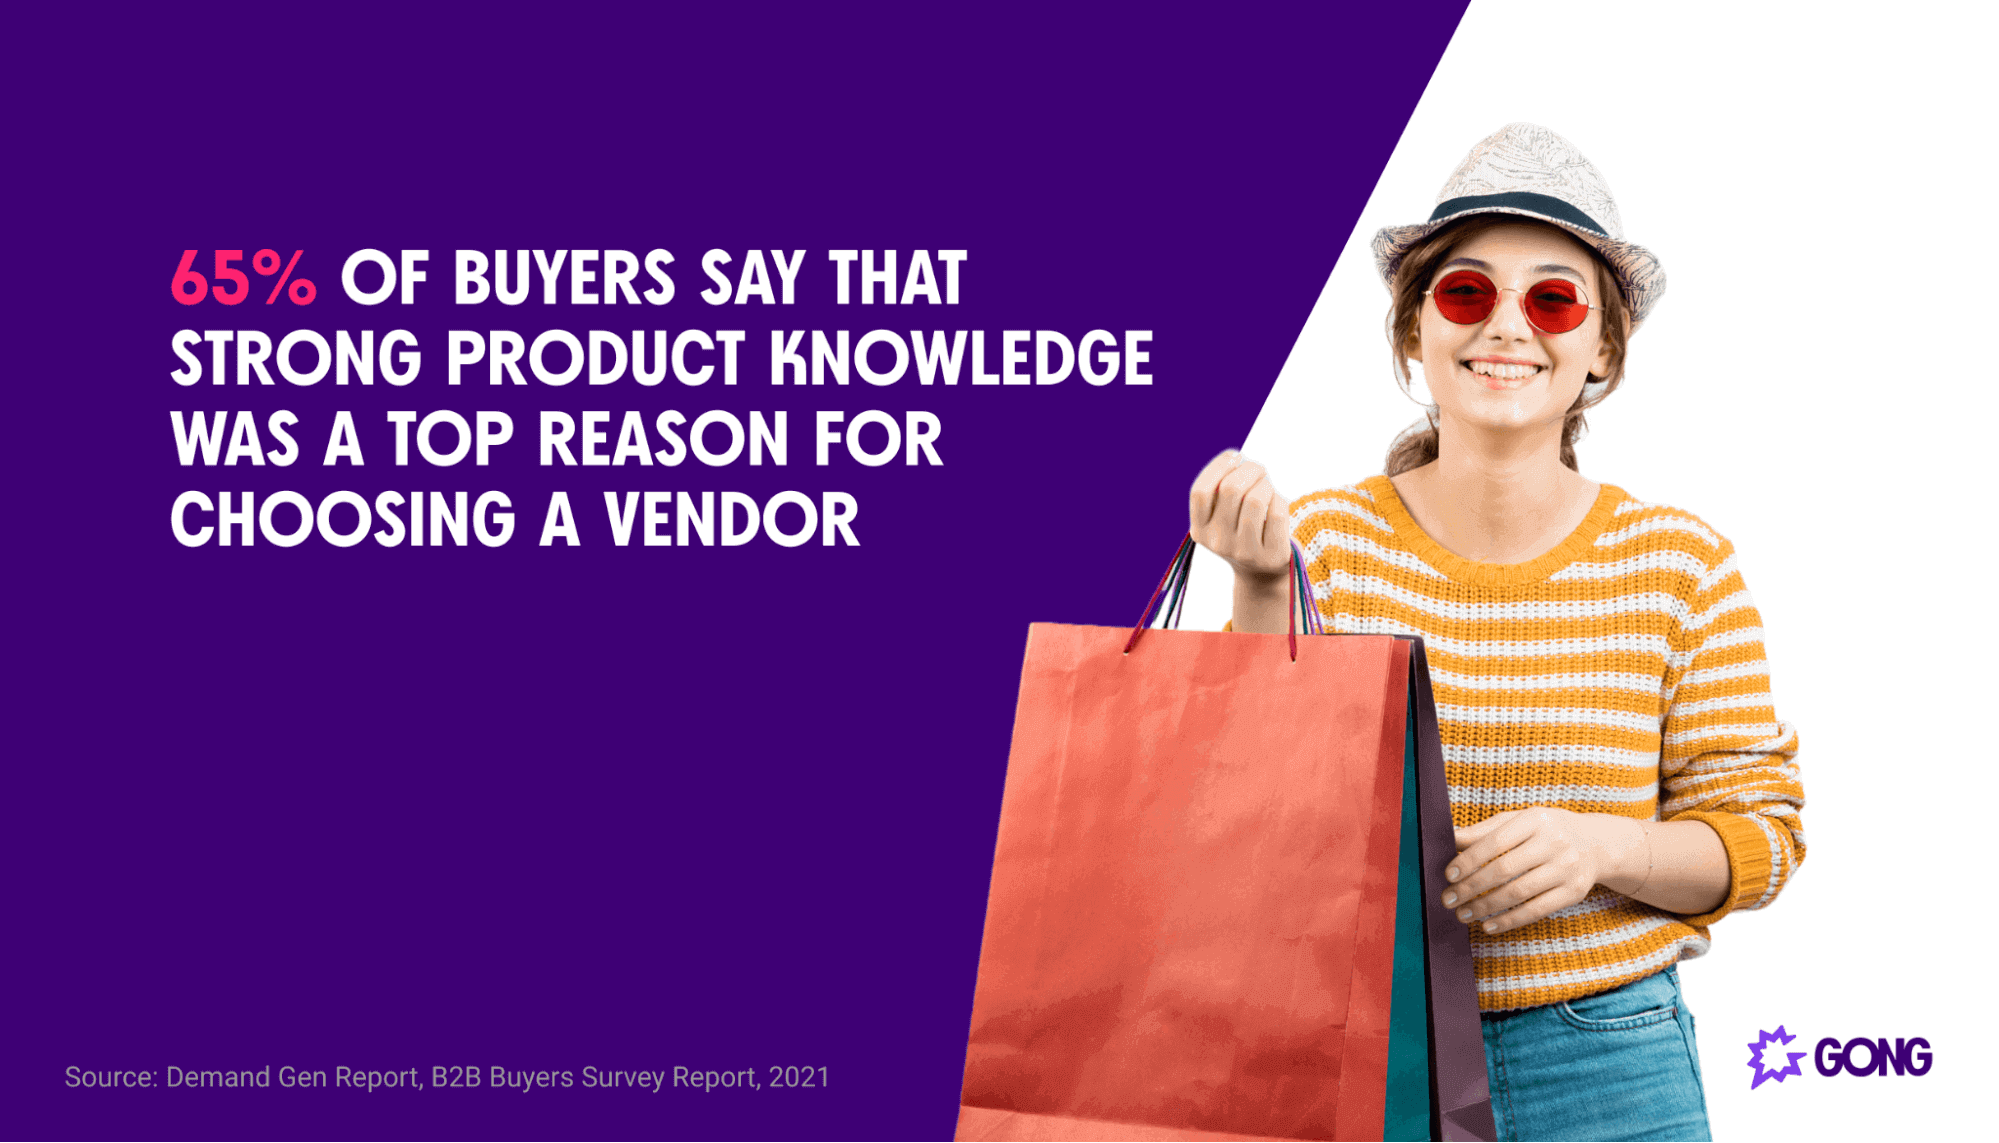 65% of buyers say that strong product knowledge was a top reason for choosing a vendor